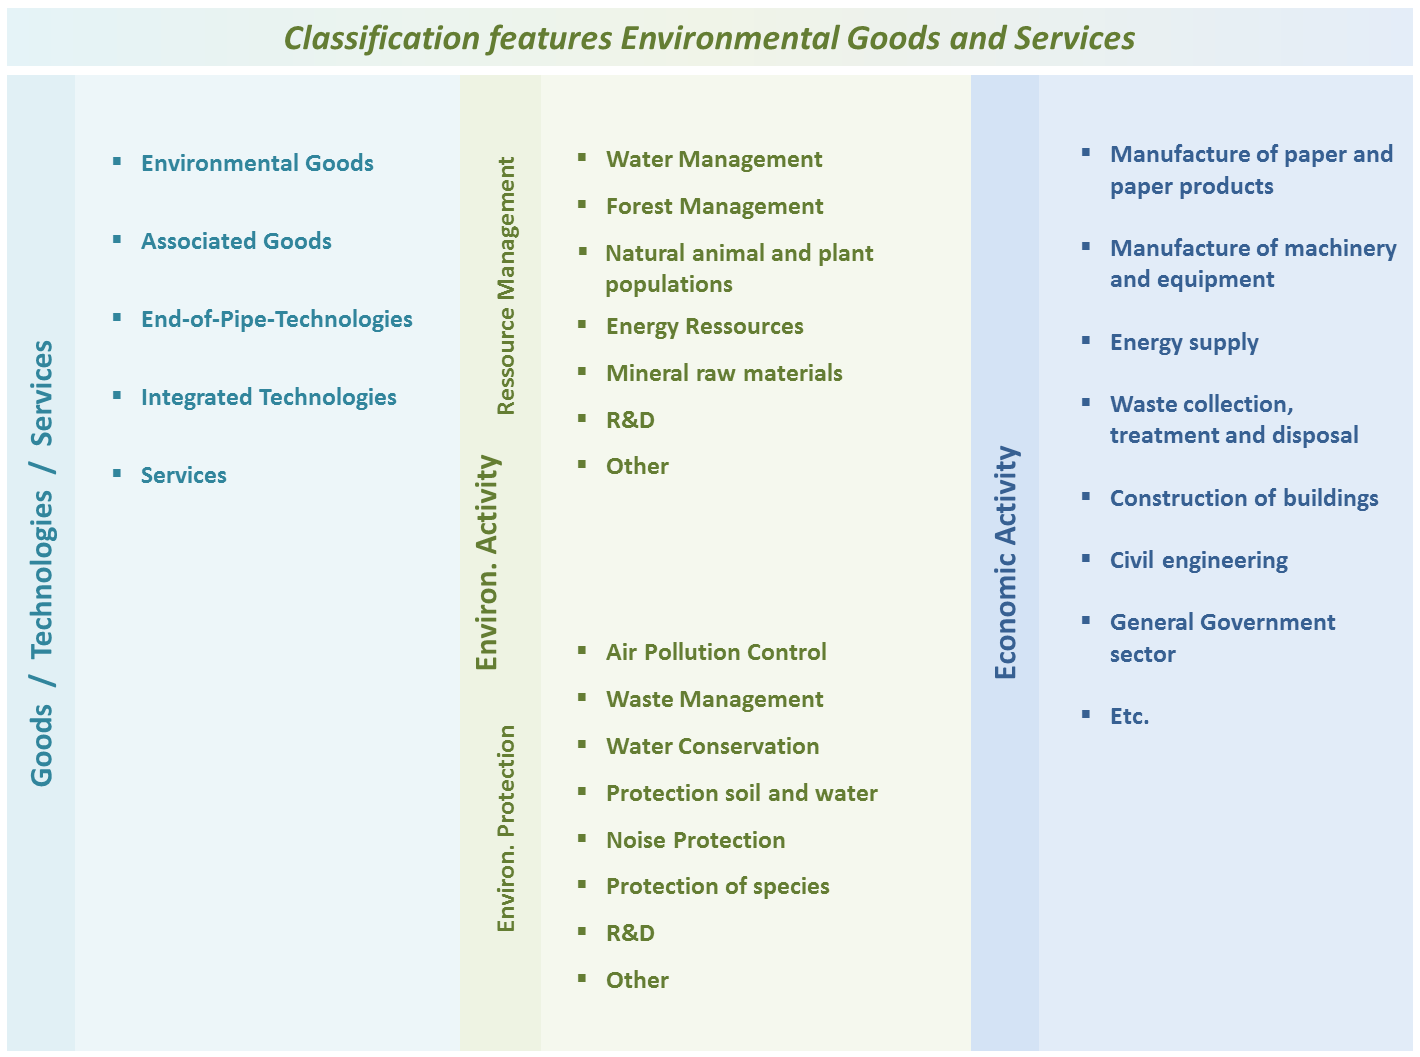 Illustration with classification features of environmental goods and services